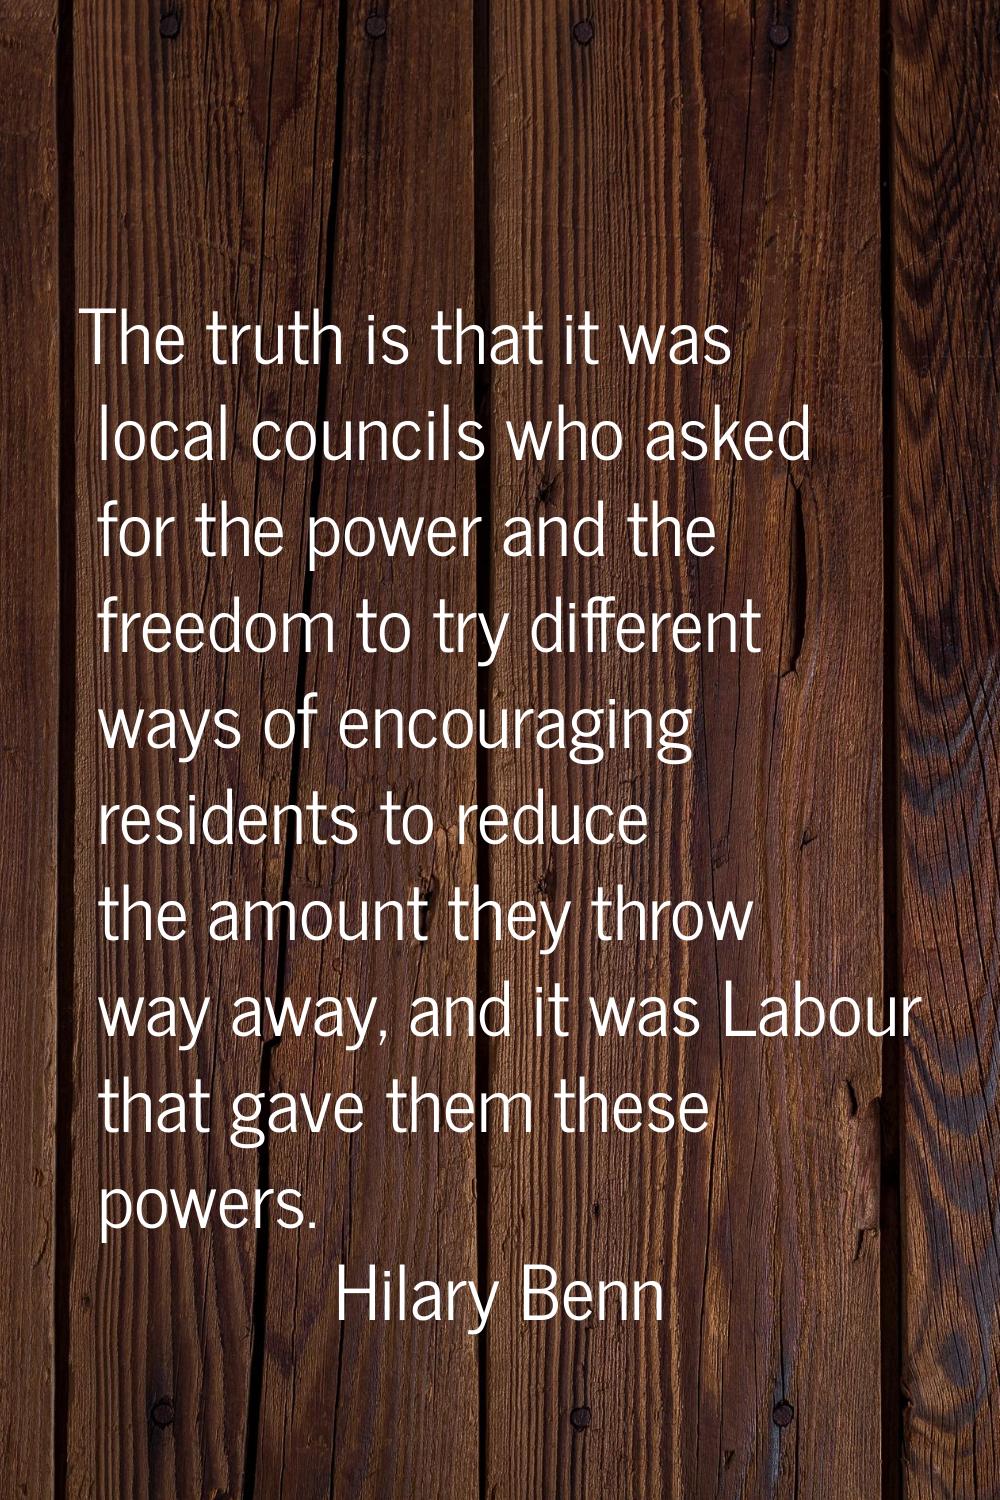 The truth is that it was local councils who asked for the power and the freedom to try different wa